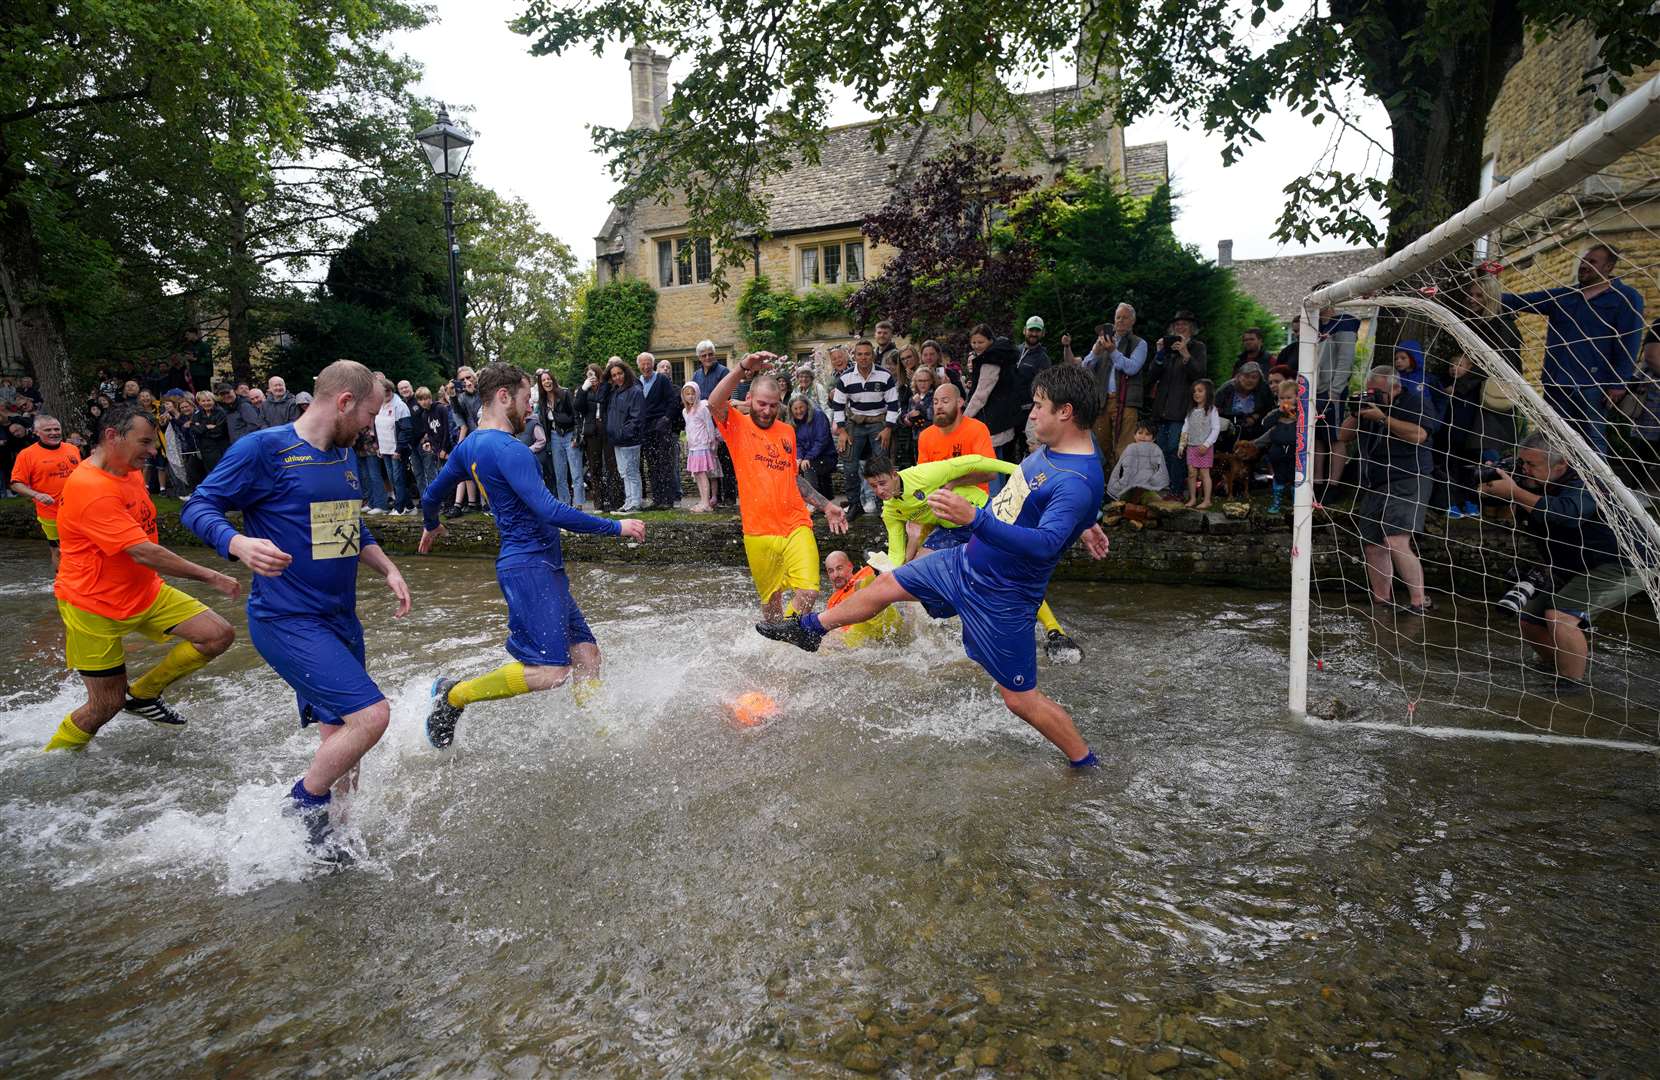 Players challenge for the ball during the annual traditional River Windrush football match, which has been taking place for more than 100 years, in the Cotswolds village of Bourton-in-the-Water, Gloucestershire, in August (PA)